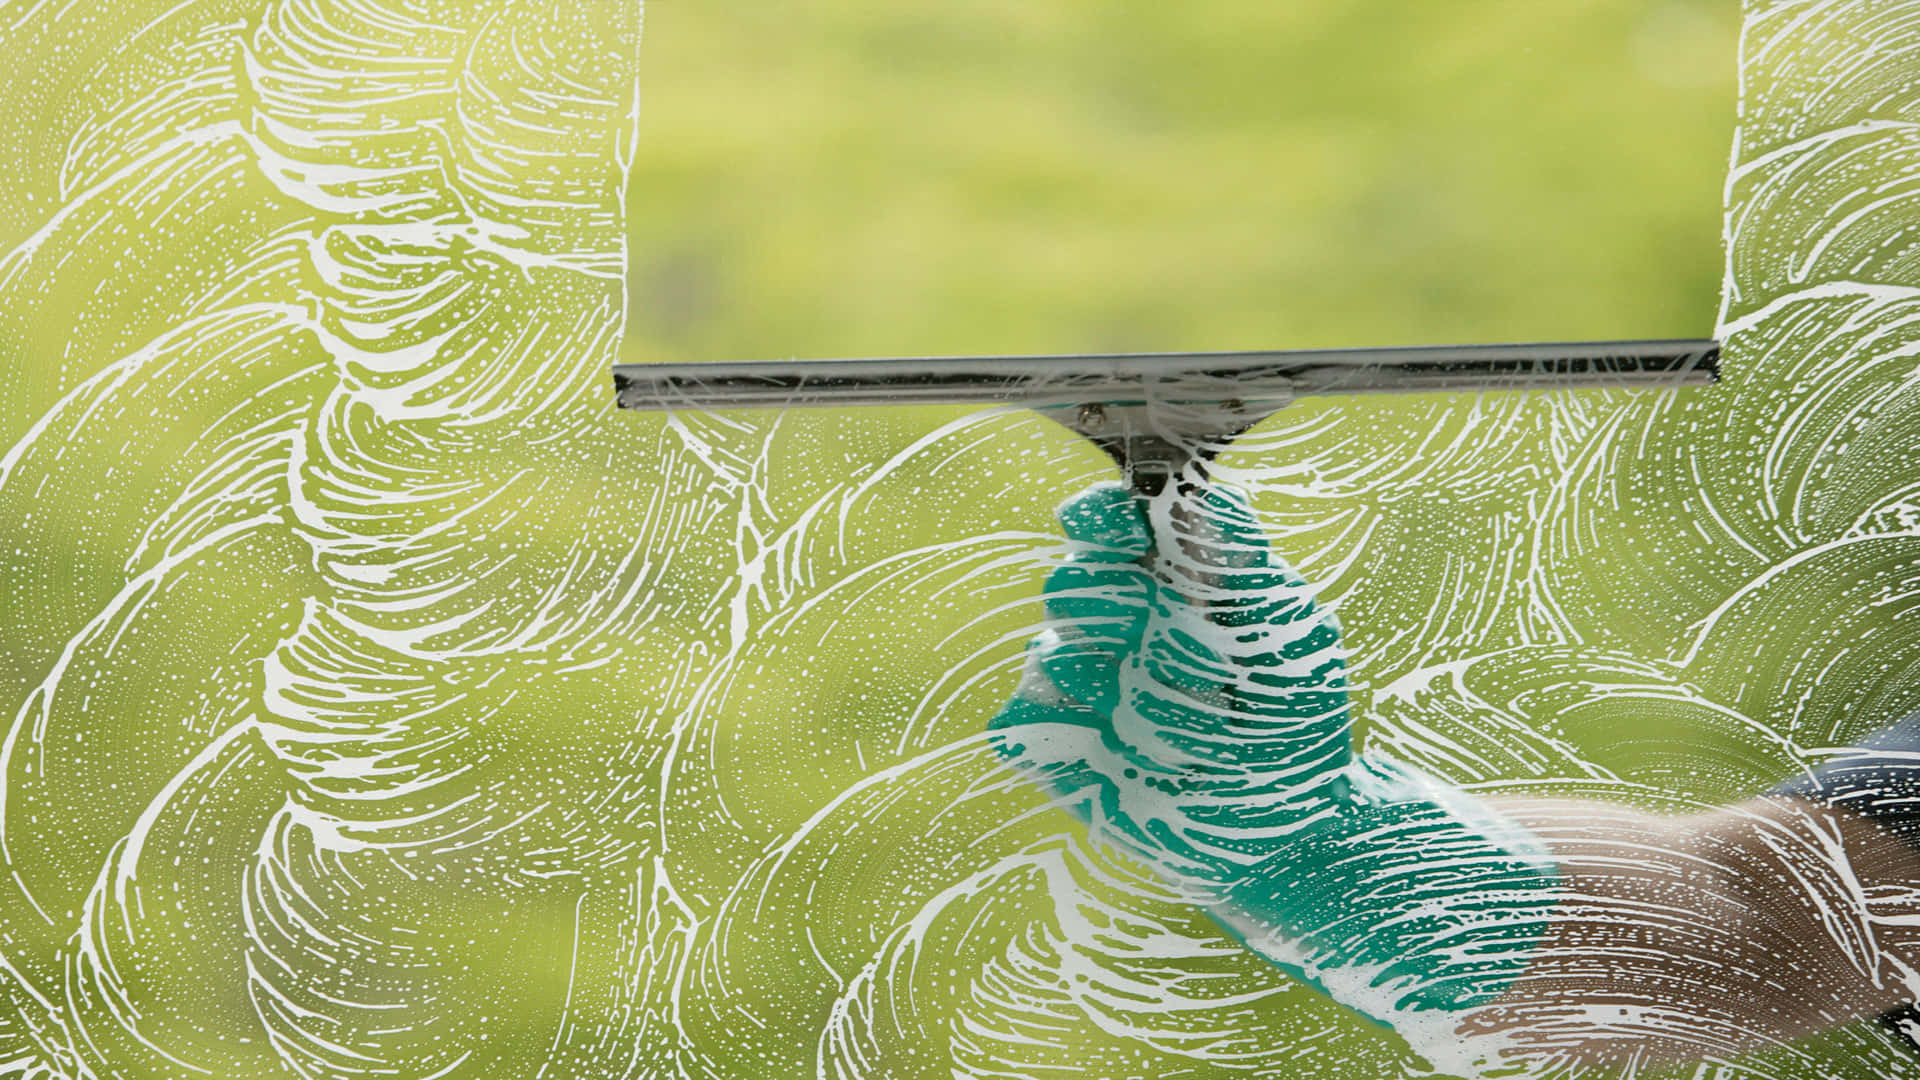 Cleaning Window Squeegee Wallpaper